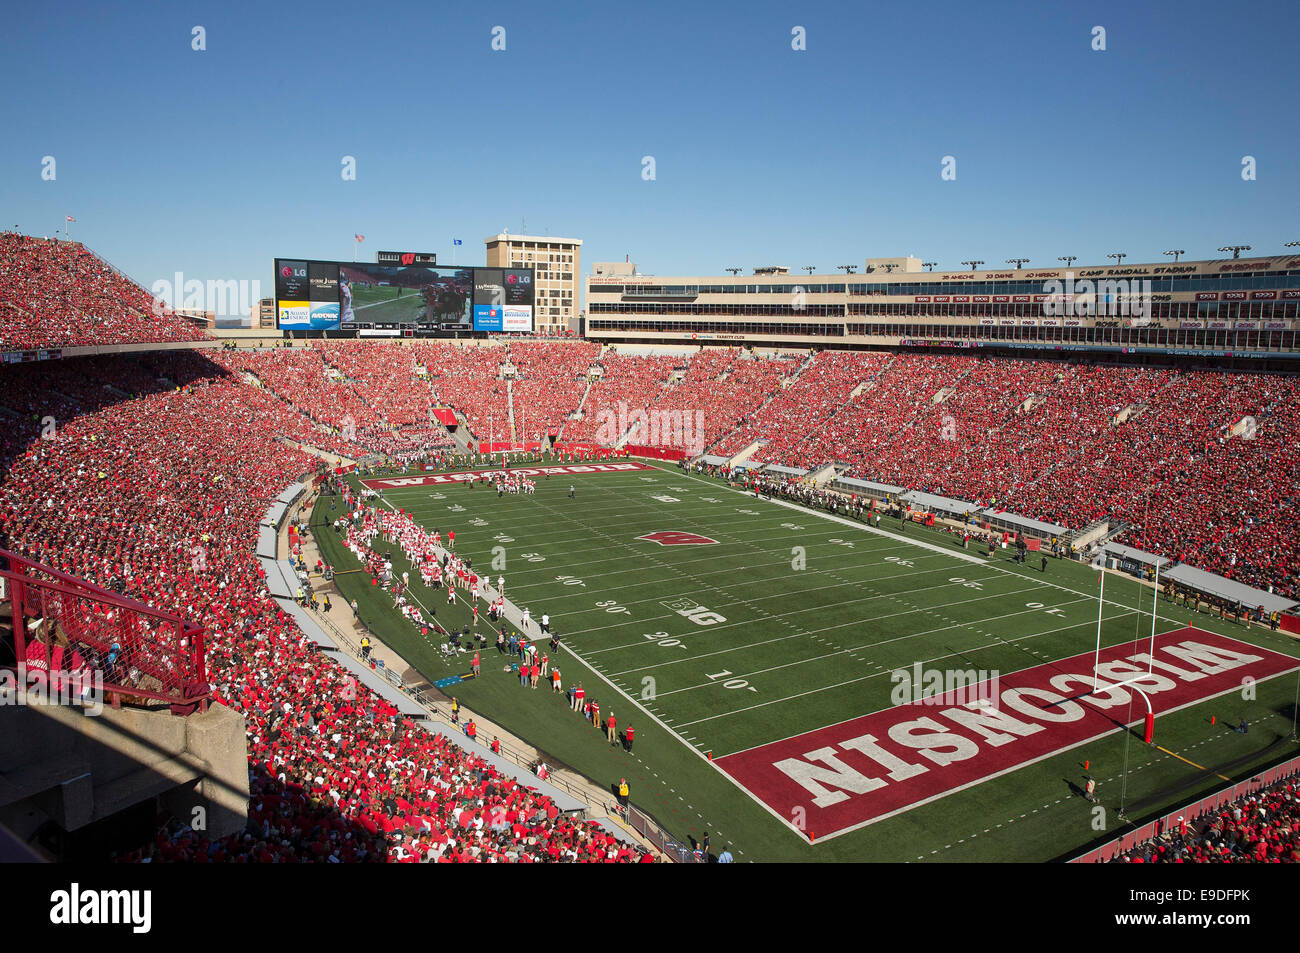 October 25, 2014: Wisconsin Badgers stadium during the NCAA Football game between the Maryland Terrapins and the Wisconsin Badgers at Camp Randall Stadium in Madison, WI. Wisconsin defeated Maryland 52-7. John Fisher/CSM Stock Photo